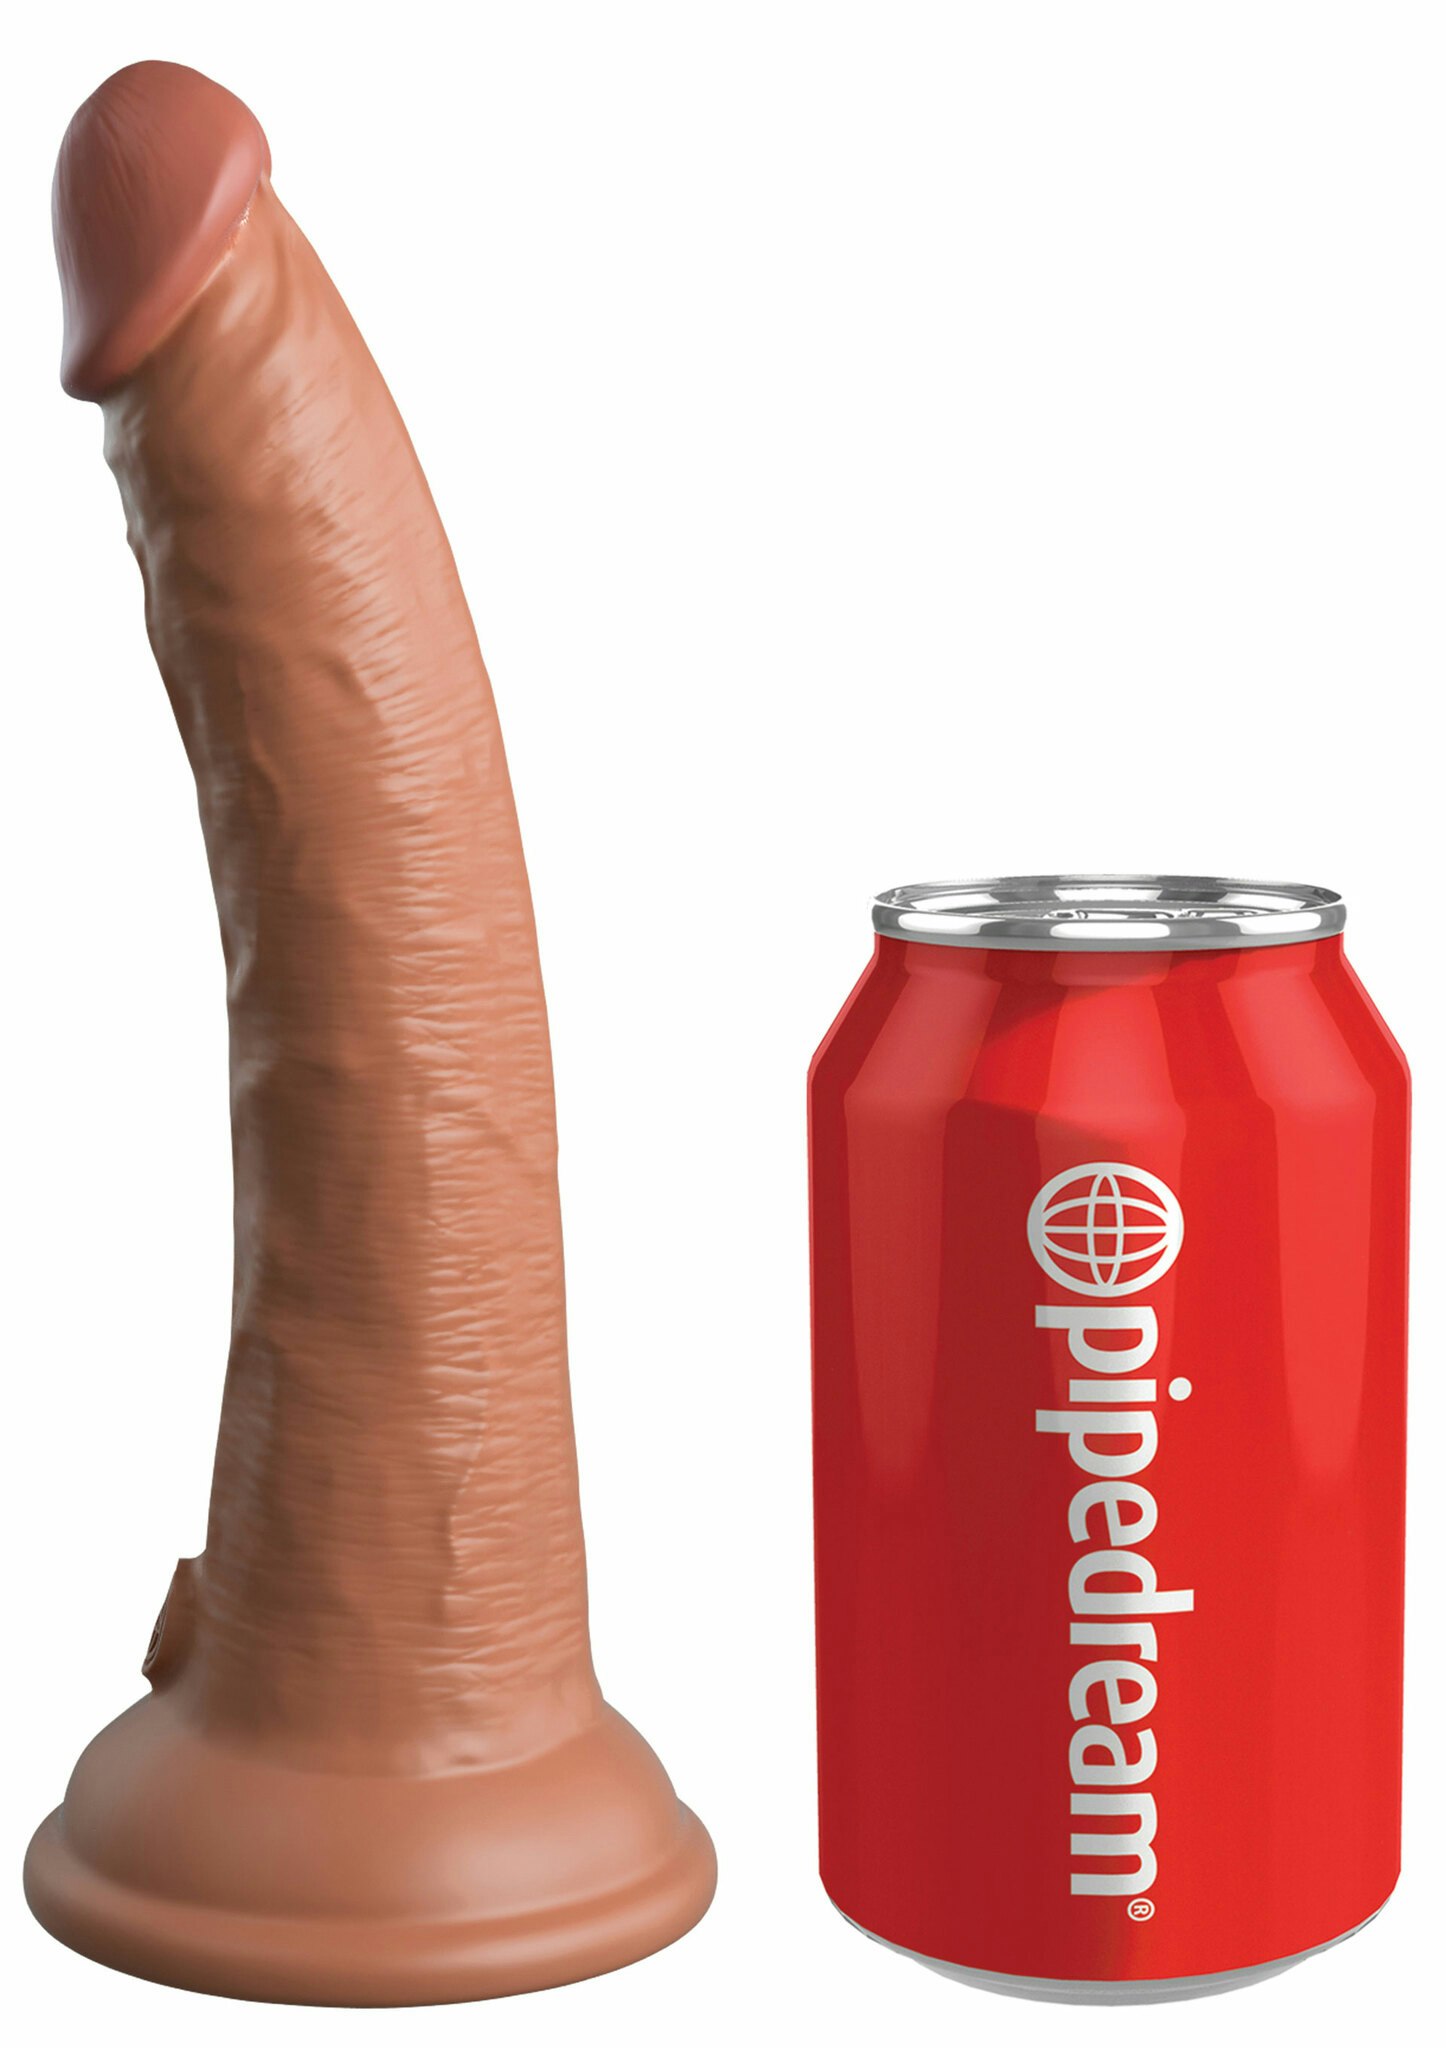 King Cock - Dual Density Silicone Cock 7 inch